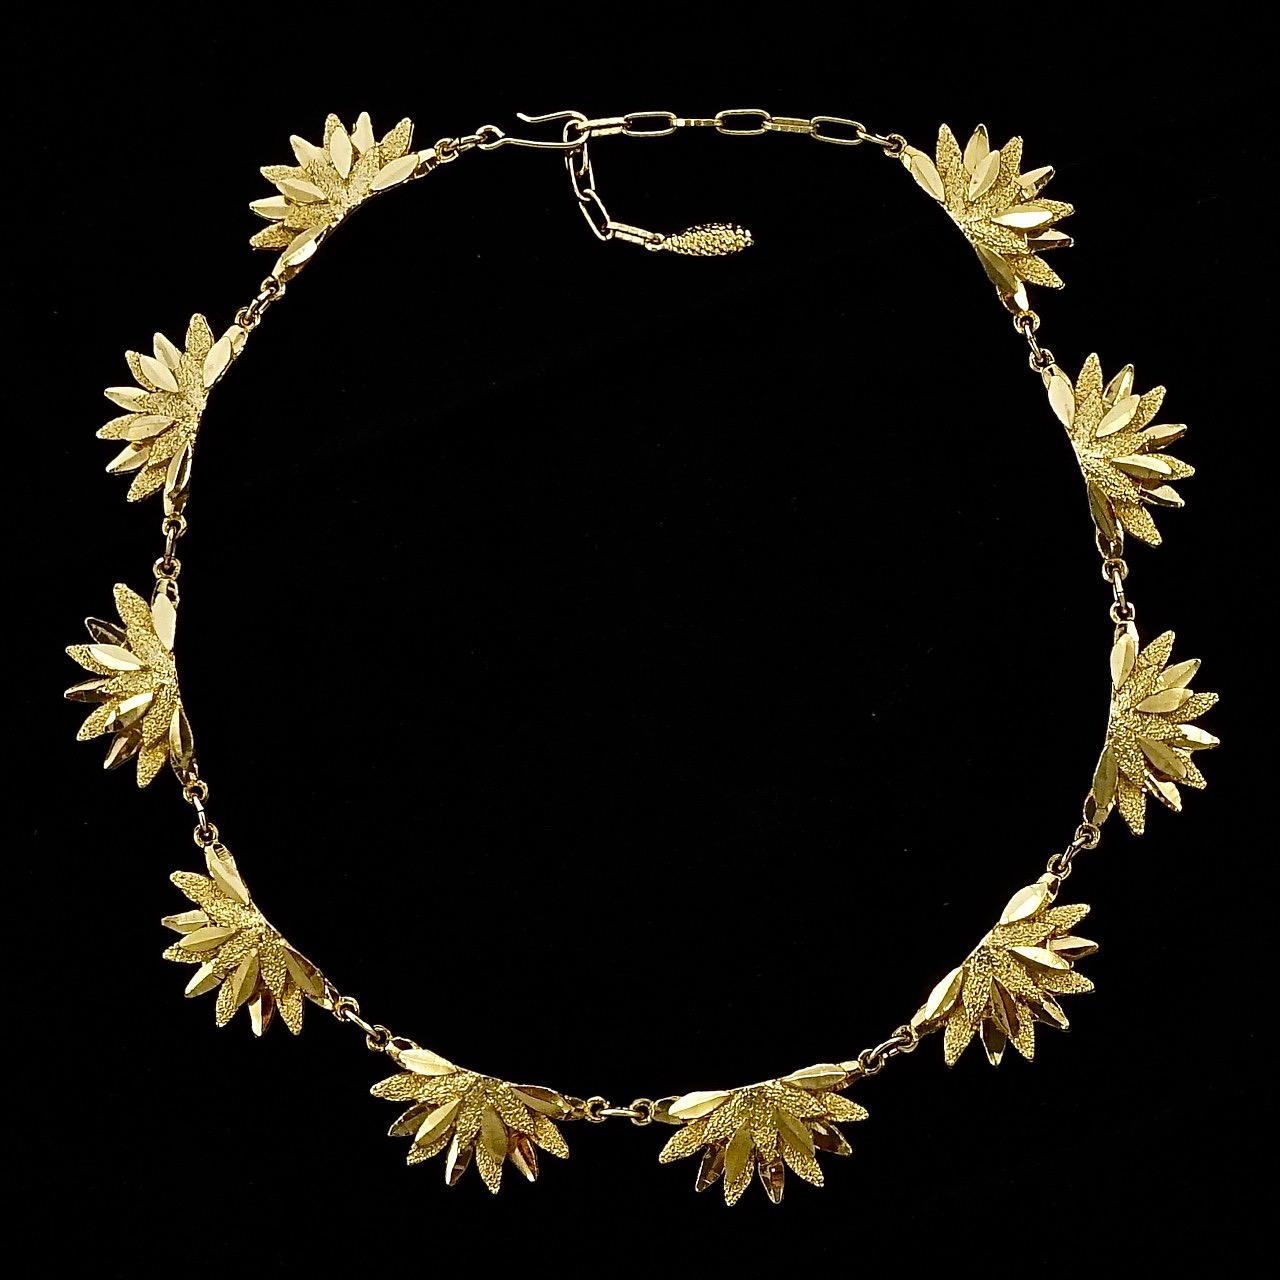 Gold Plated Brushed and Shiny Petal Link Necklace circa 1970s For Sale 5